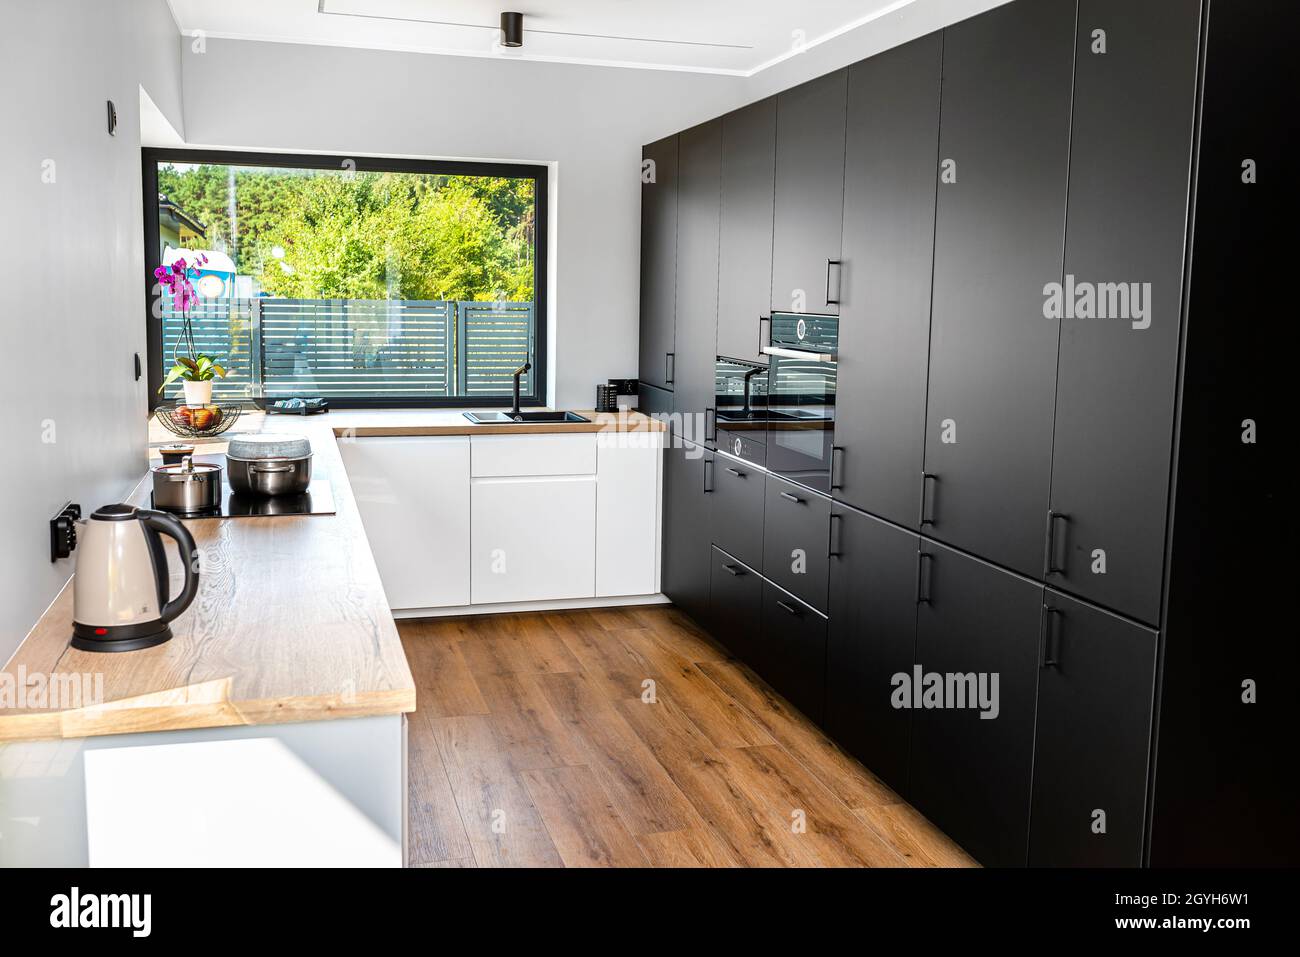 https://c8.alamy.com/comp/2GYH6W1/a-modern-kitchen-with-white-and-black-fronts-and-a-large-corner-window-vinyl-panels-on-the-floor-2GYH6W1.jpg